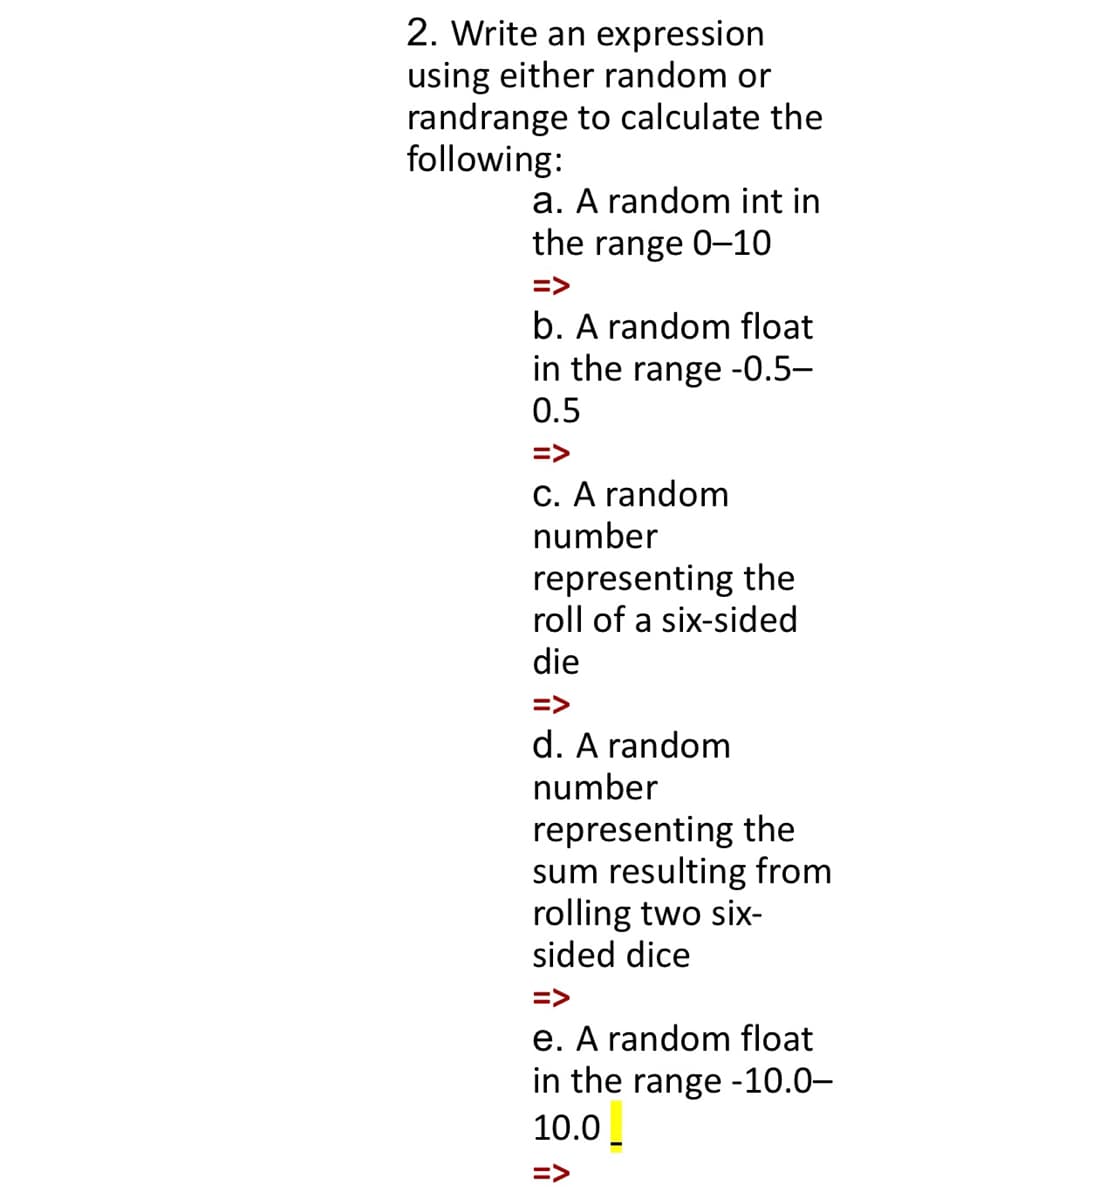 2. Write an expression
using either random or
randrange to calculate the
following:
a. A random int in
the range 0-10
=>
b. A random float
in the range -0.5–
0.5
=>
C. A random
number
representing the
roll of a six-sided
die
=>
d. A random
number
representing the
sum resulting from
rolling two six-
sided dice
=>
e. A random float
in the range -10.0–
10.0_
=>
